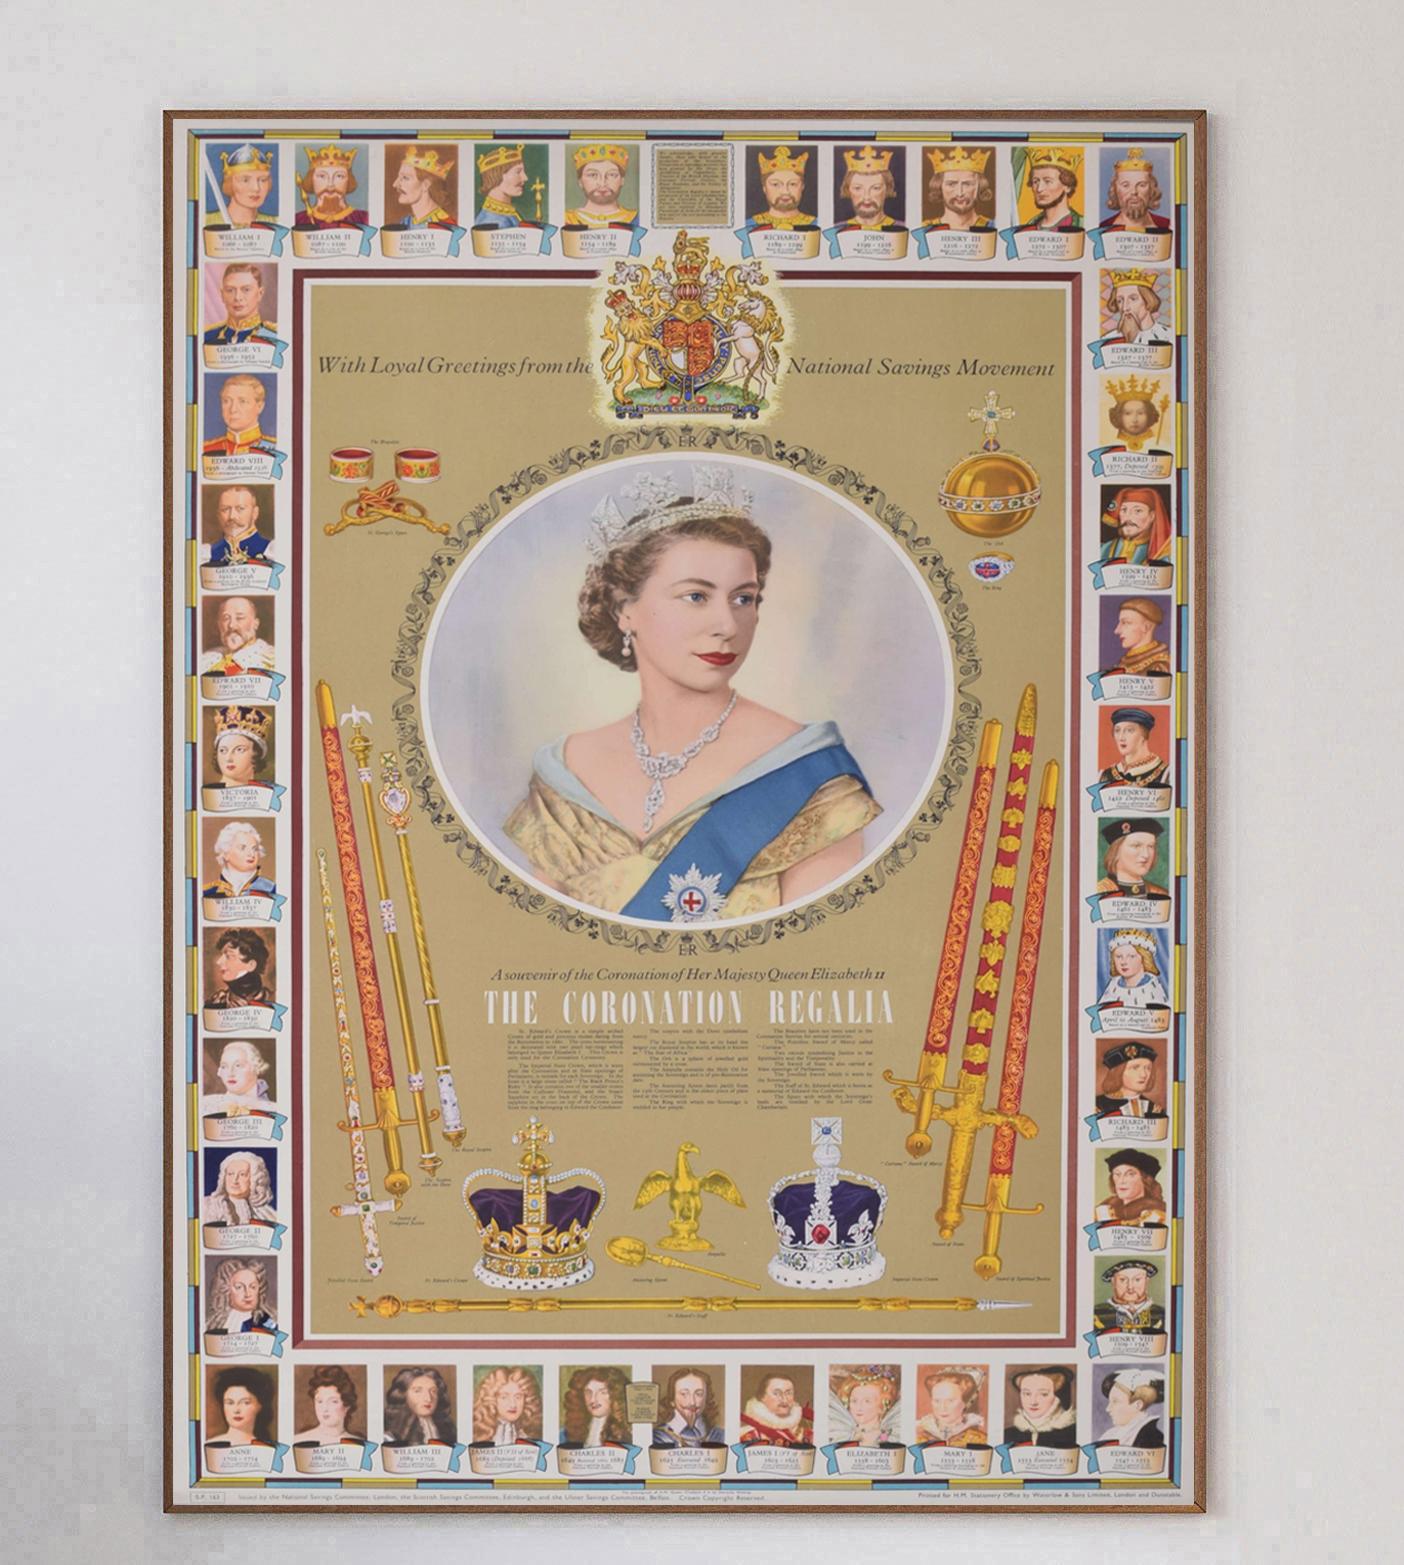 A stunning piece of Royalist & British history, this 1953 poster was produced by the National Savings Committee to commemorate the coronation of Her Majesty Queen Elizabeth II on 2nd June 1953. The National Savings Committee were founded in World